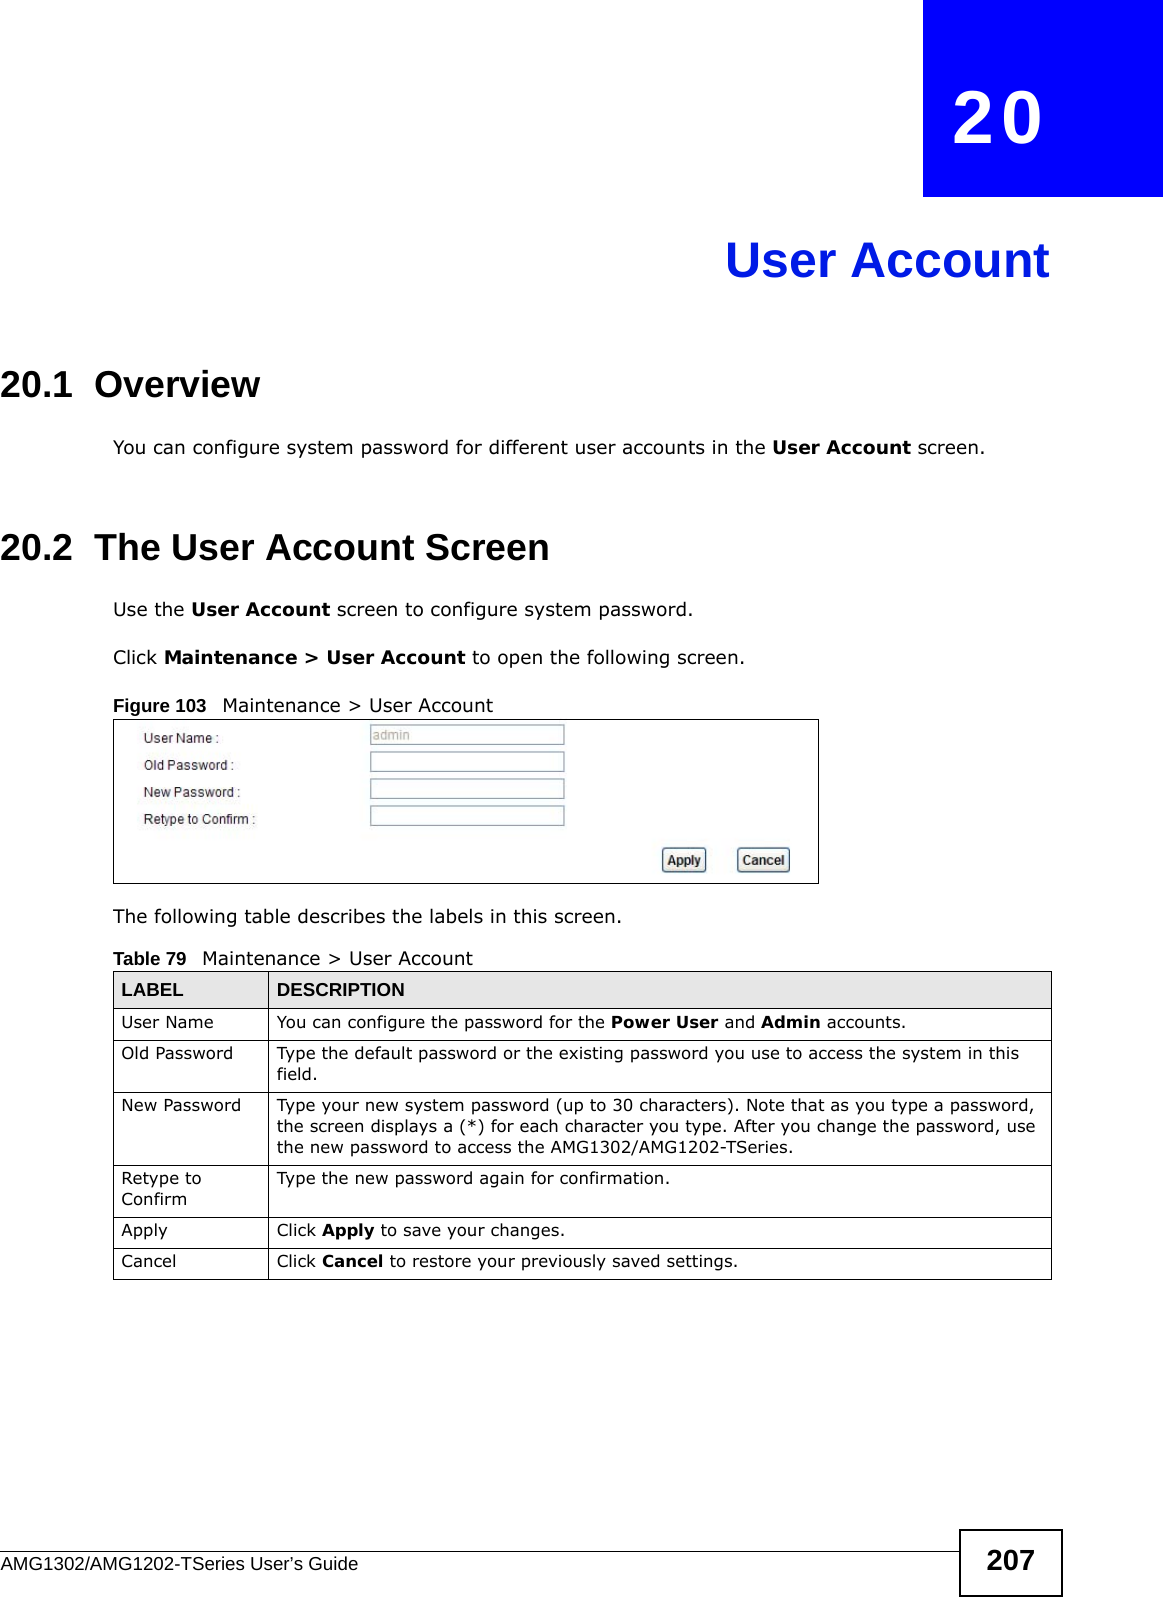 AMG1302/AMG1202-TSeries User’s Guide 207CHAPTER   20User Account20.1  Overview You can configure system password for different user accounts in the User Account screen.20.2  The User Account ScreenUse the User Account screen to configure system password.Click Maintenance &gt; User Account to open the following screen. Figure 103   Maintenance &gt; User AccountThe following table describes the labels in this screen. Table 79   Maintenance &gt; User AccountLABEL DESCRIPTIONUser Name You can configure the password for the Power User and Admin accounts.Old Password Type the default password or the existing password you use to access the system in this field.New Password Type your new system password (up to 30 characters). Note that as you type a password, the screen displays a (*) for each character you type. After you change the password, use the new password to access the AMG1302/AMG1202-TSeries.Retype to ConfirmType the new password again for confirmation.Apply Click Apply to save your changes.Cancel Click Cancel to restore your previously saved settings.